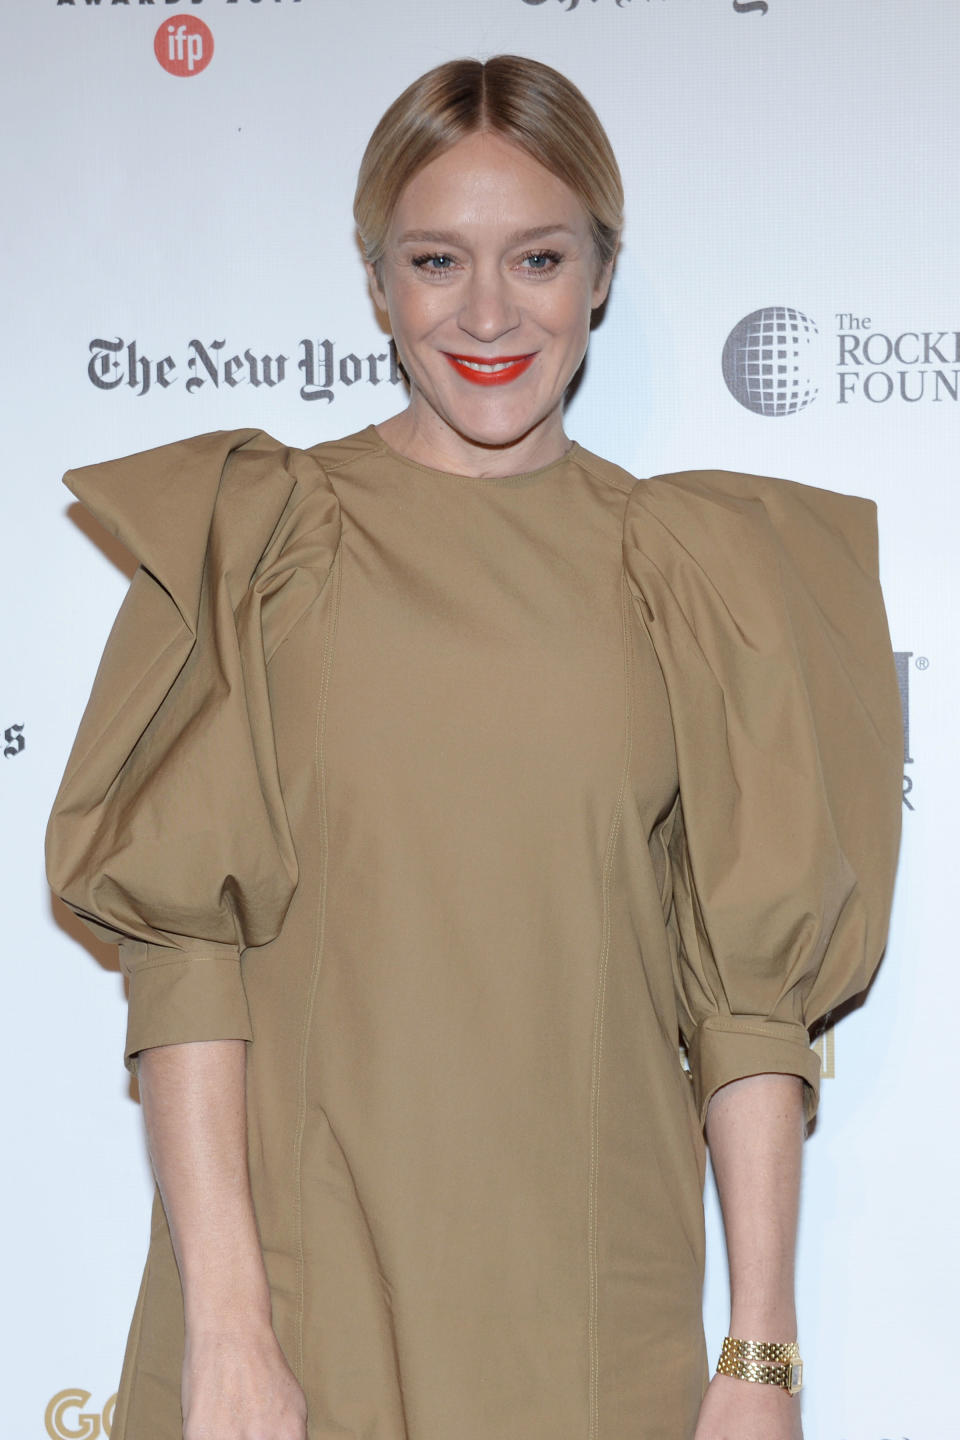 NEW YORK, NEW YORK - DECEMBER 2: Chloe Sevigny attends 2019 IFP Gotham Awards on December 2, 2019 at Cipriani Wall Street in New York City. (Photo by Paul Bruinooge/Patrick McMullan via Getty Images)